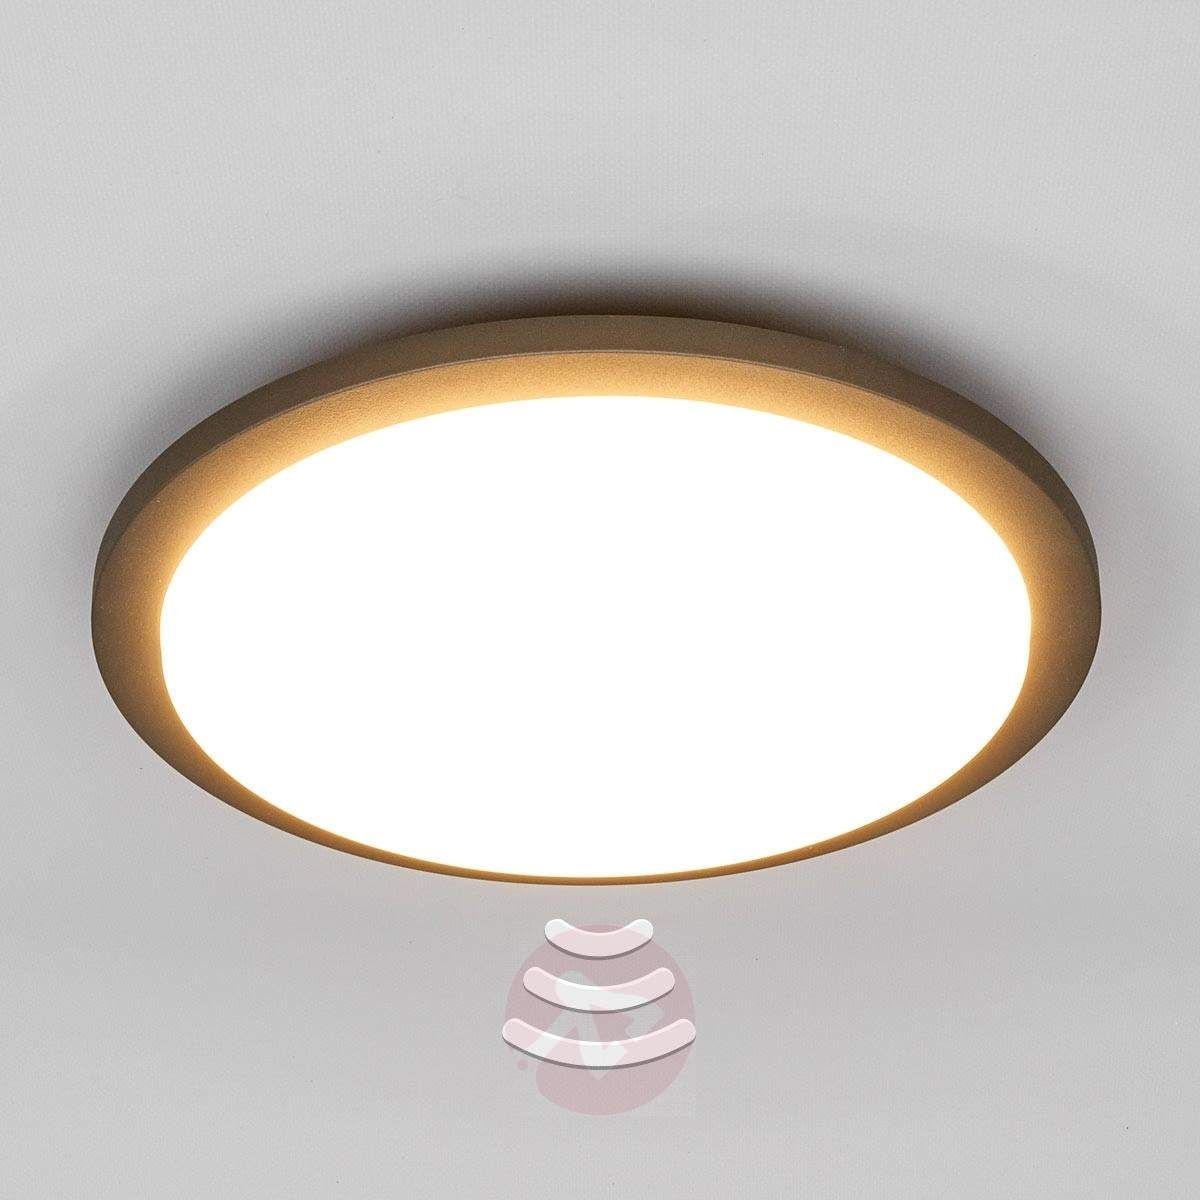 Benton – Led Outdoor Ceiling Light With Sensor | Lights.co.uk Intended For Outdoor Ceiling Pir Lights (Photo 9 of 15)